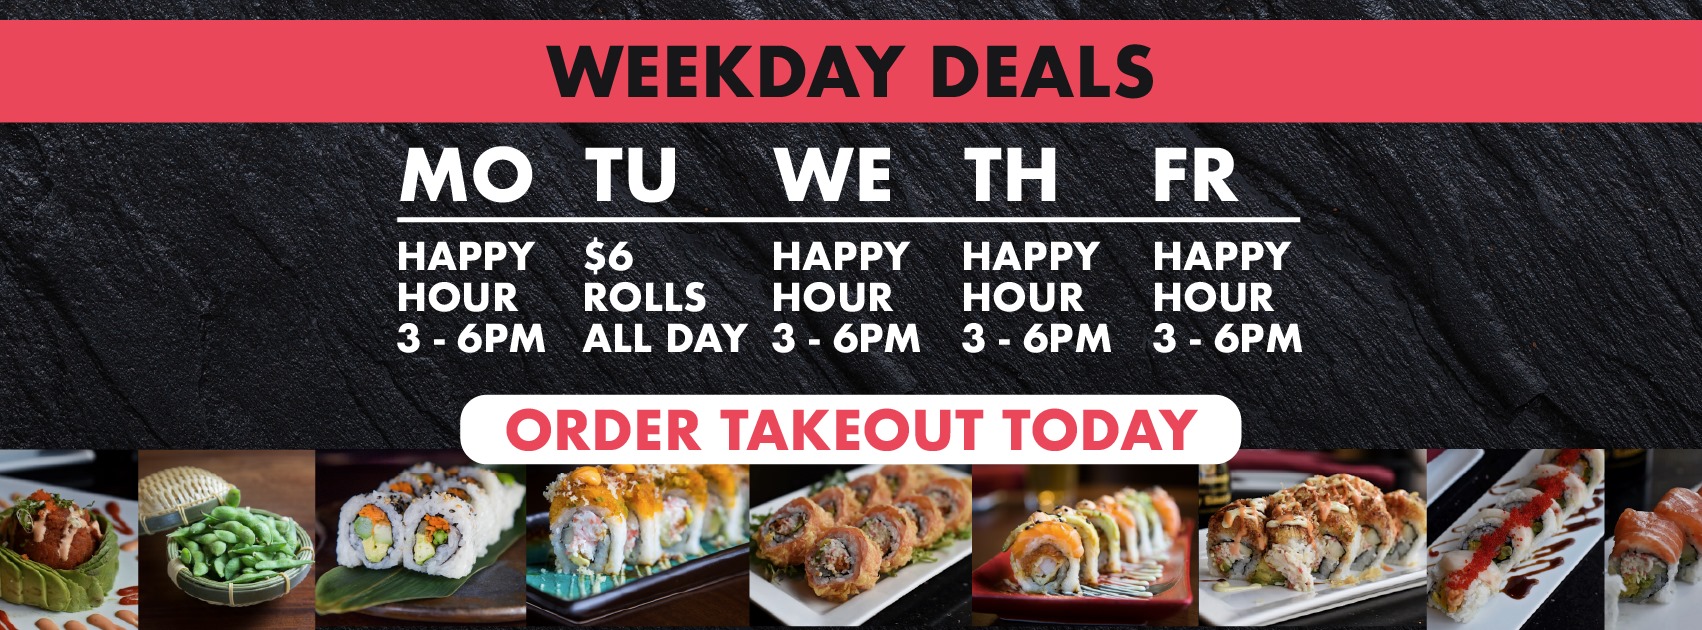 Weekly sushi deals